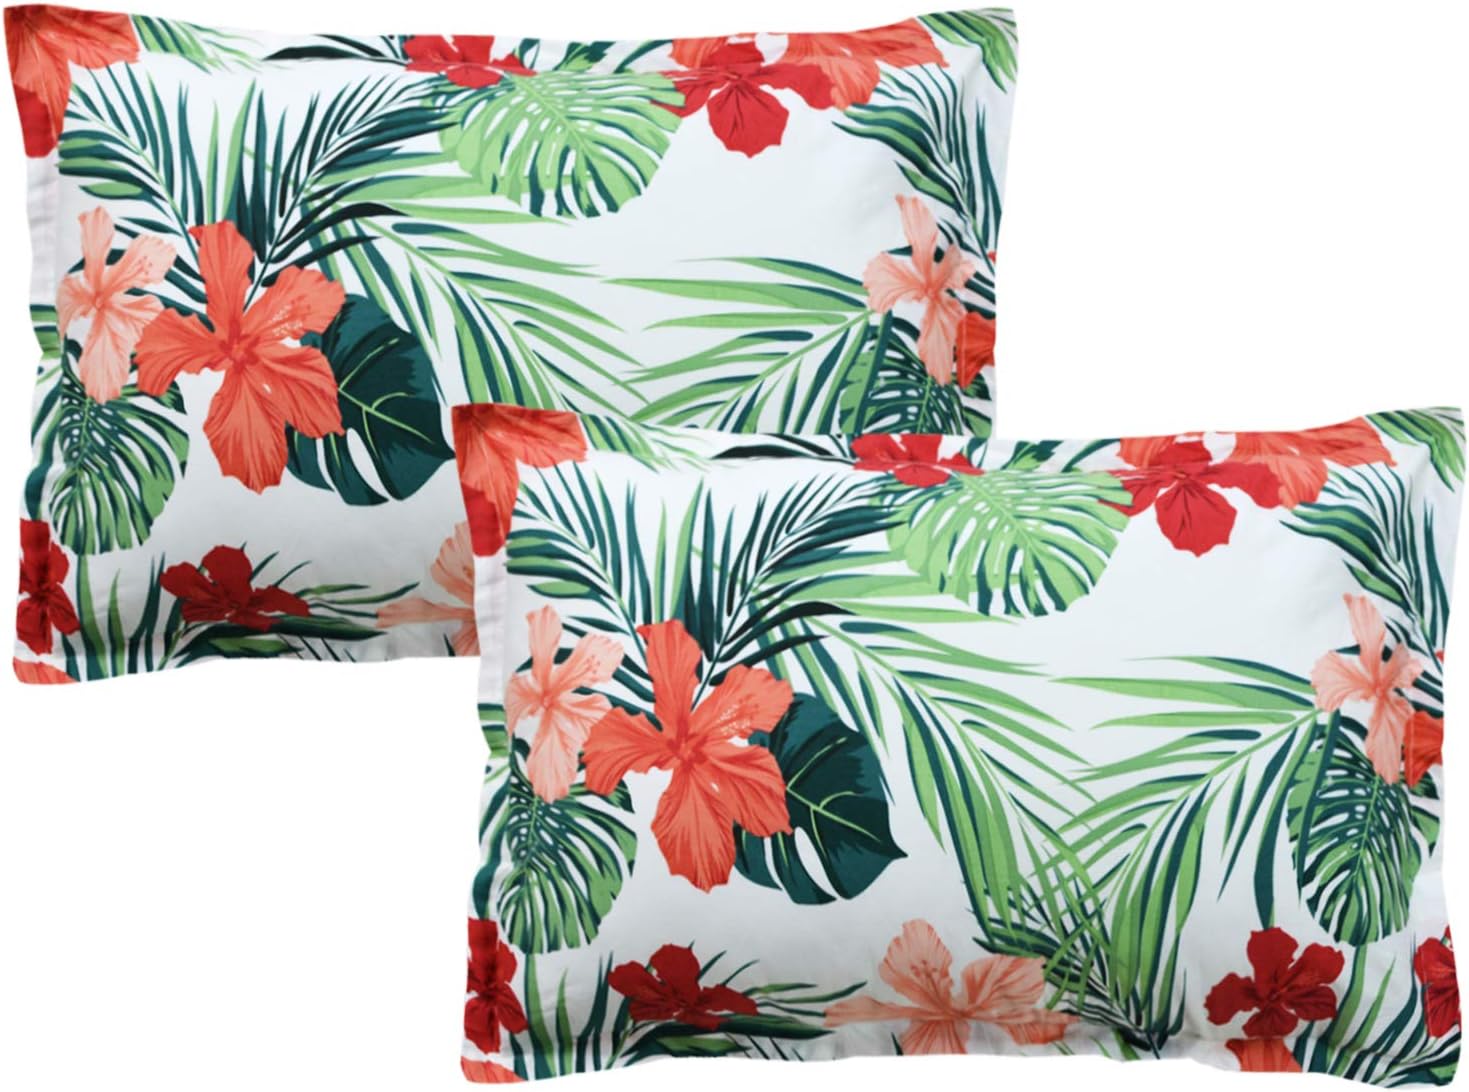 FADFAY Pillow Shams Hawaiian Style Red Hibiscus Palm Leaves Pillowcases 100% Cotton Super Soft Hypoallergenic with Hidden Zipper Closure,2-Pieces Standard Size 20* 29